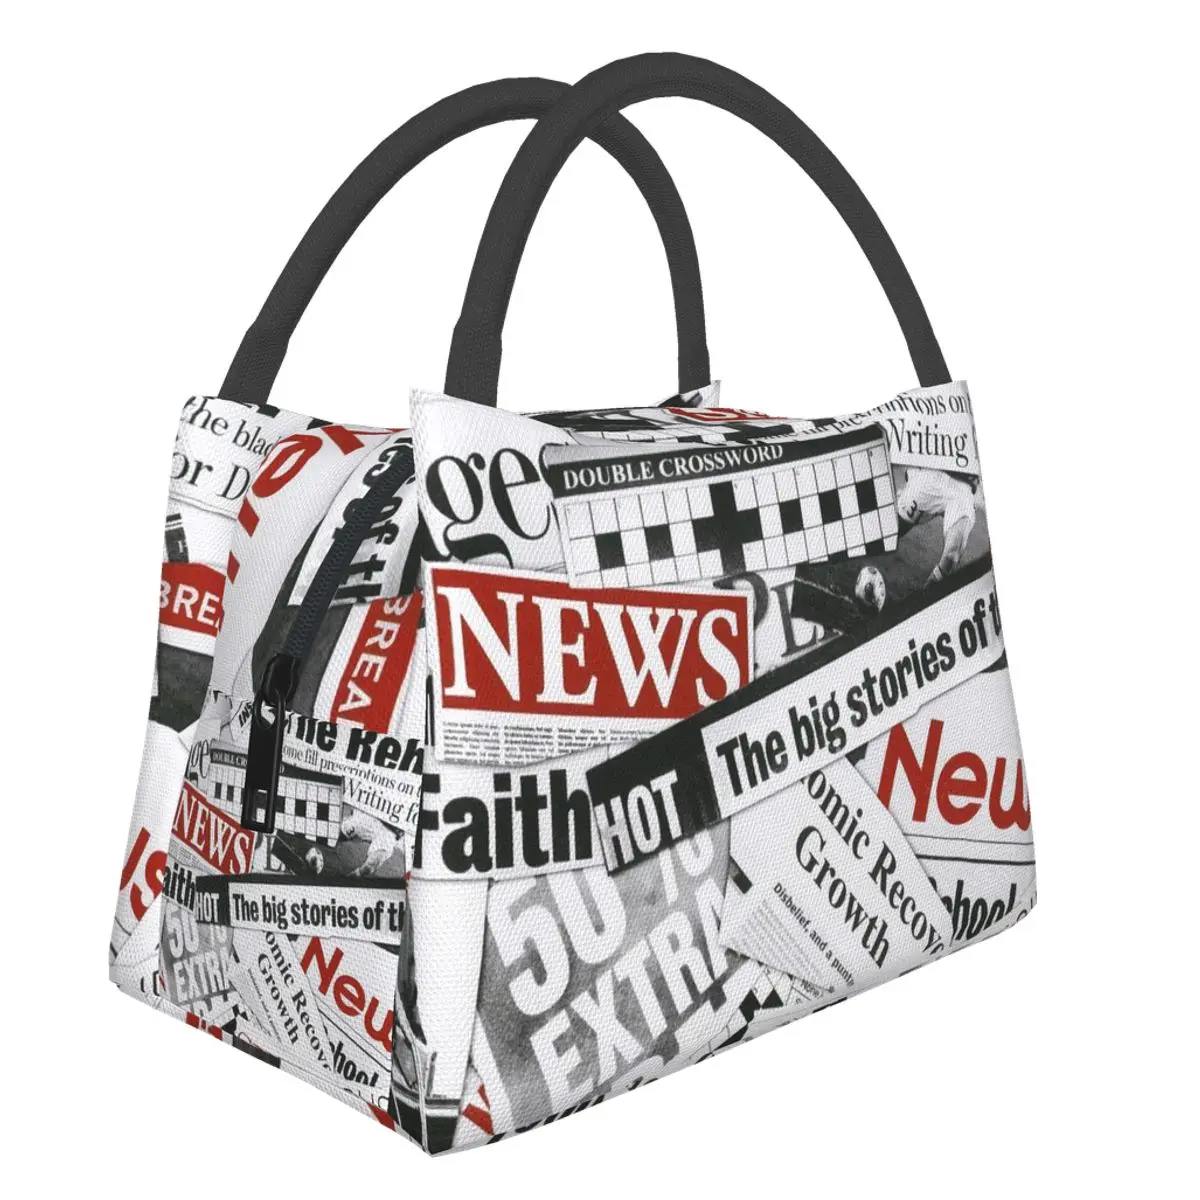 Portable Lunch Bag Newspaper Pattern Print Thermal Insulated Lunch Box Tote Cooler Handbag Bento Dinner Container School Storage school insulated bento storage tote lunch container dinner cooler food handbag pouch bags thermal portable lunch new box bag new